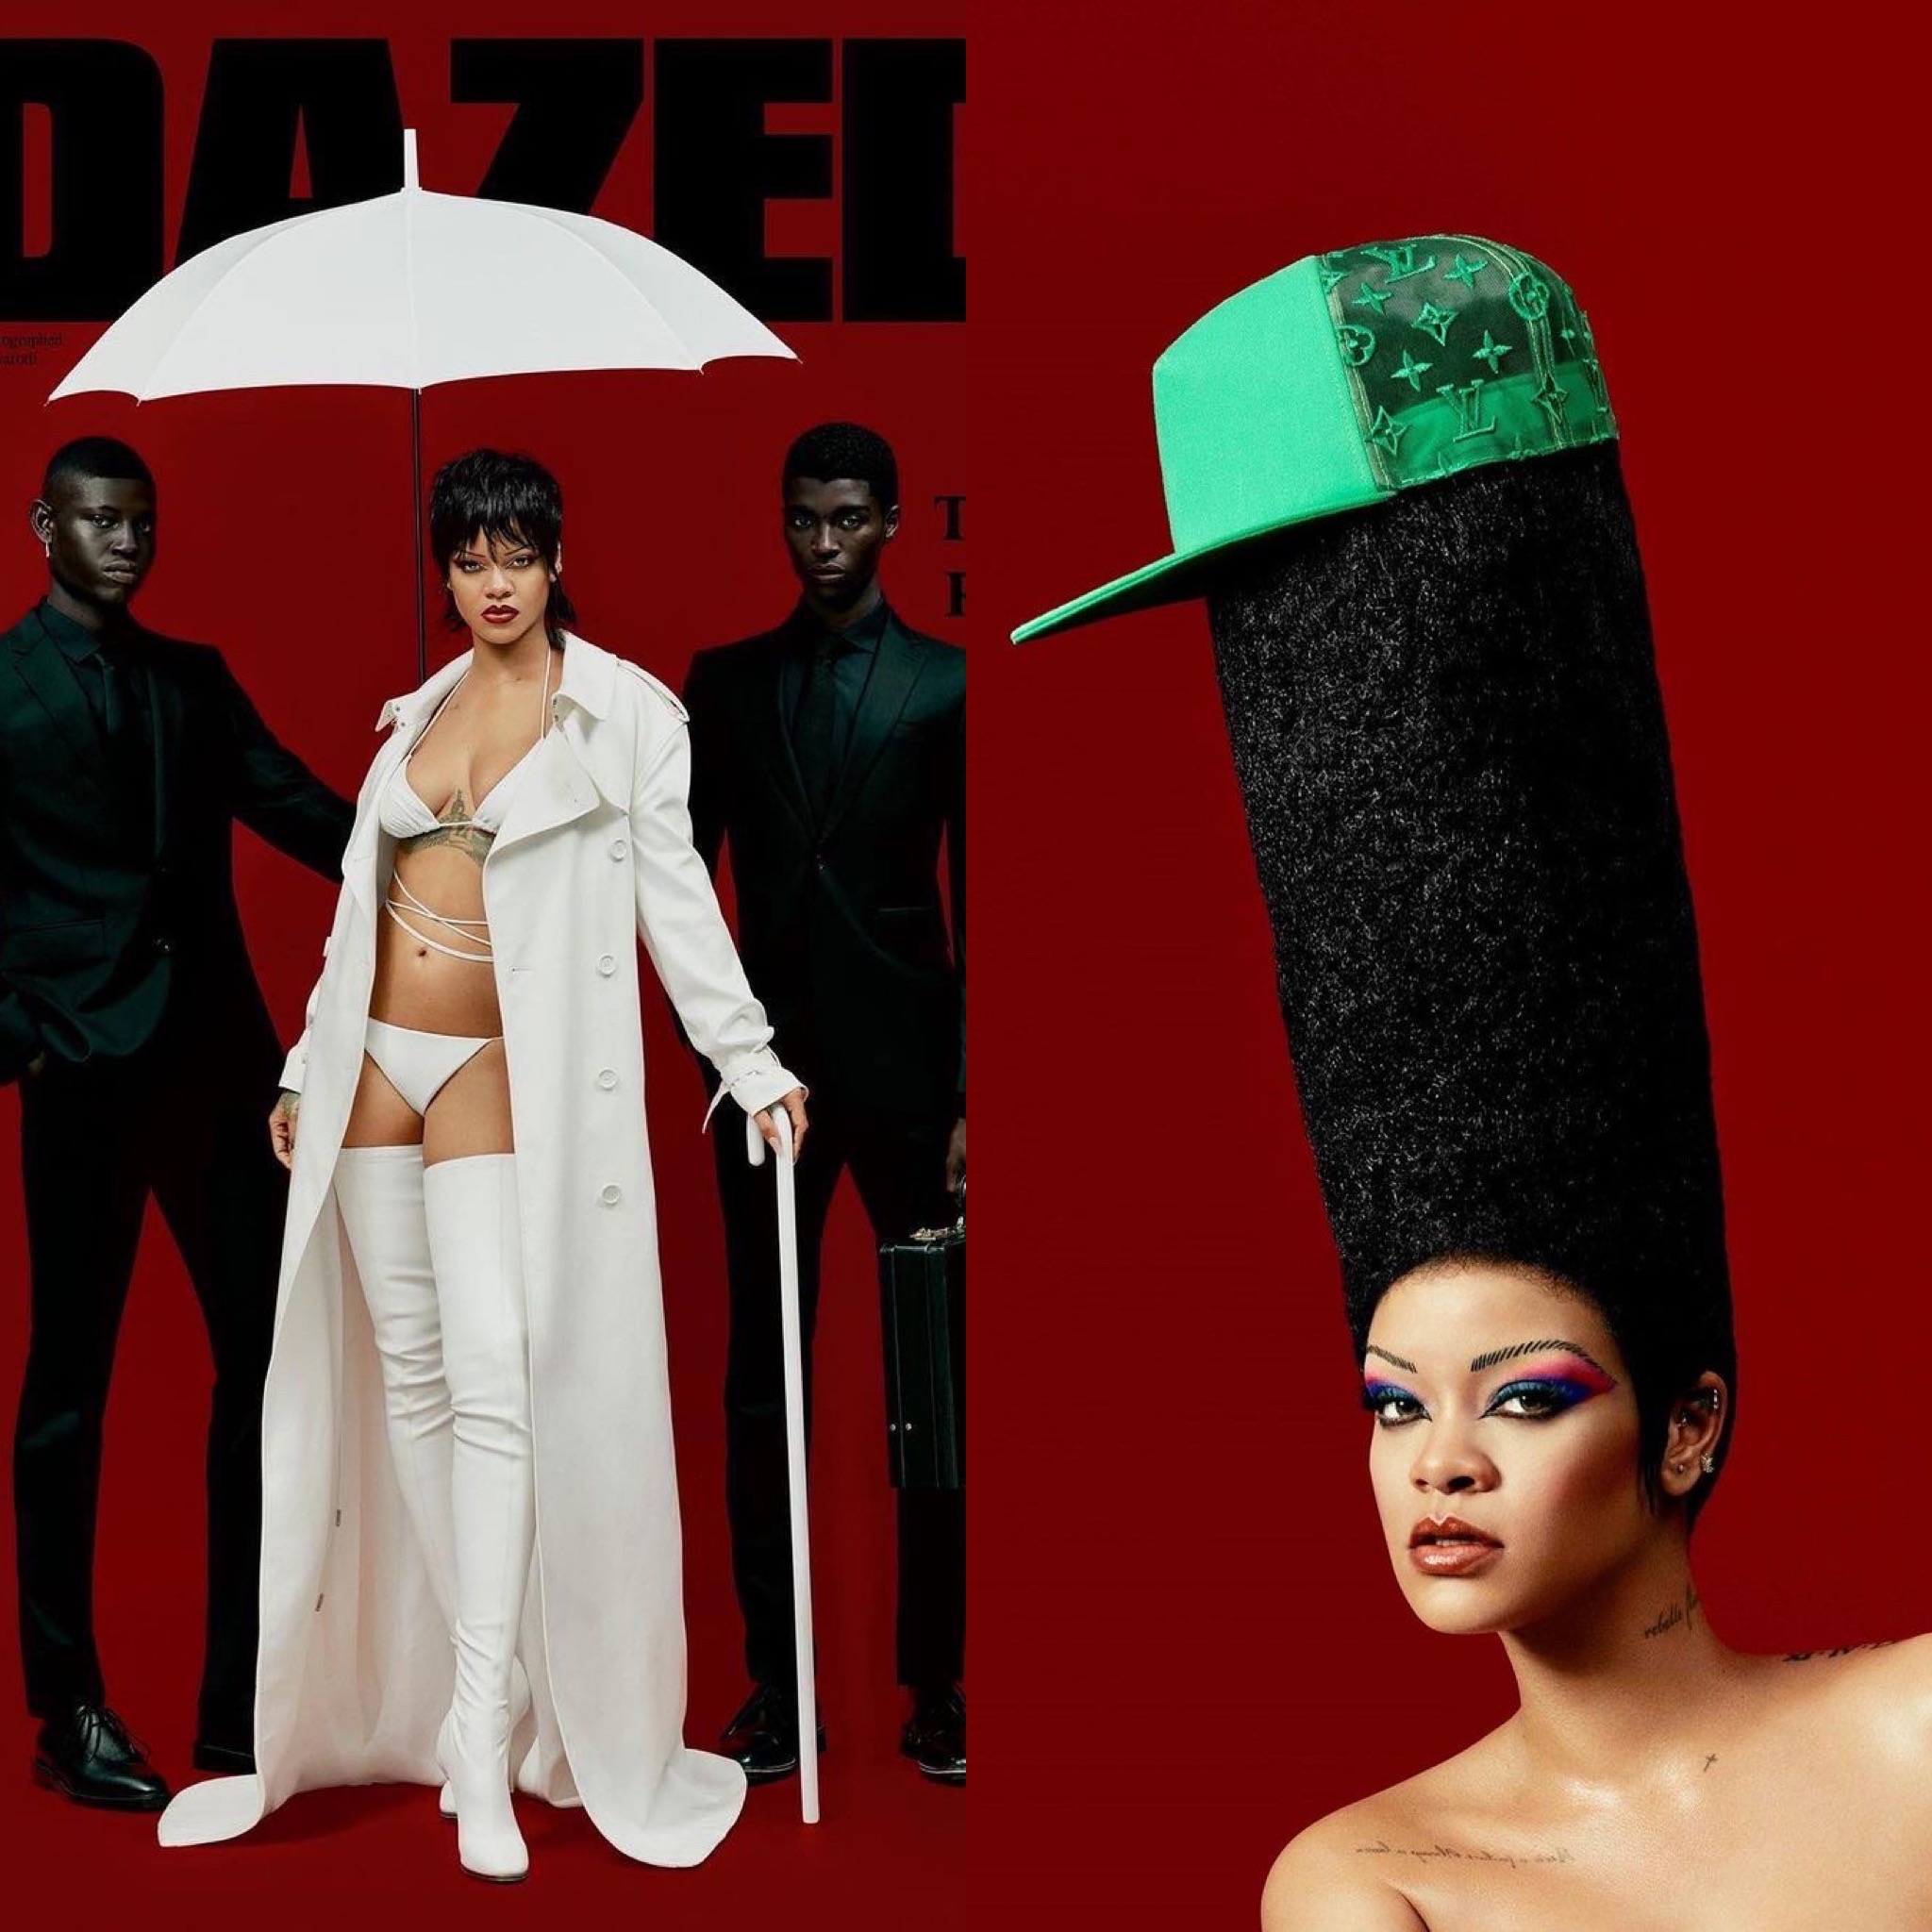 Dazed on X: “To me, Rihanna is pop culture's most chameleonic protagonist,  and the perfect cover star for this special moment in Dazed's history.” – Ib  Kamara From music to make-up, everything @